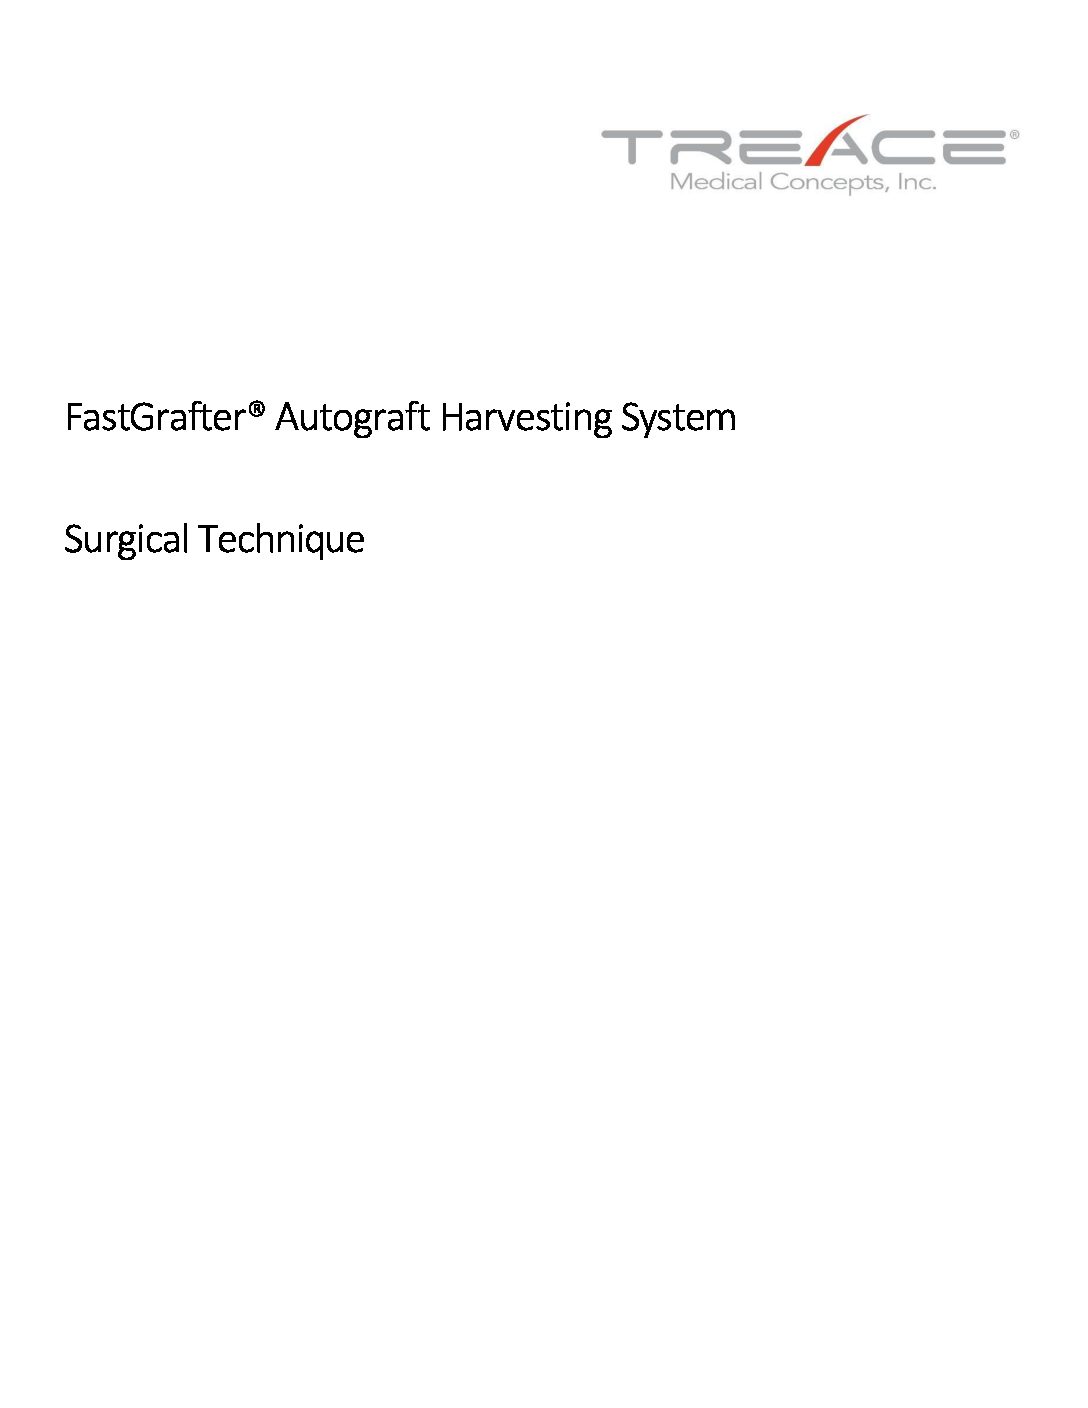 FastGrafter® Autograft Harvesting System Surgical Technique